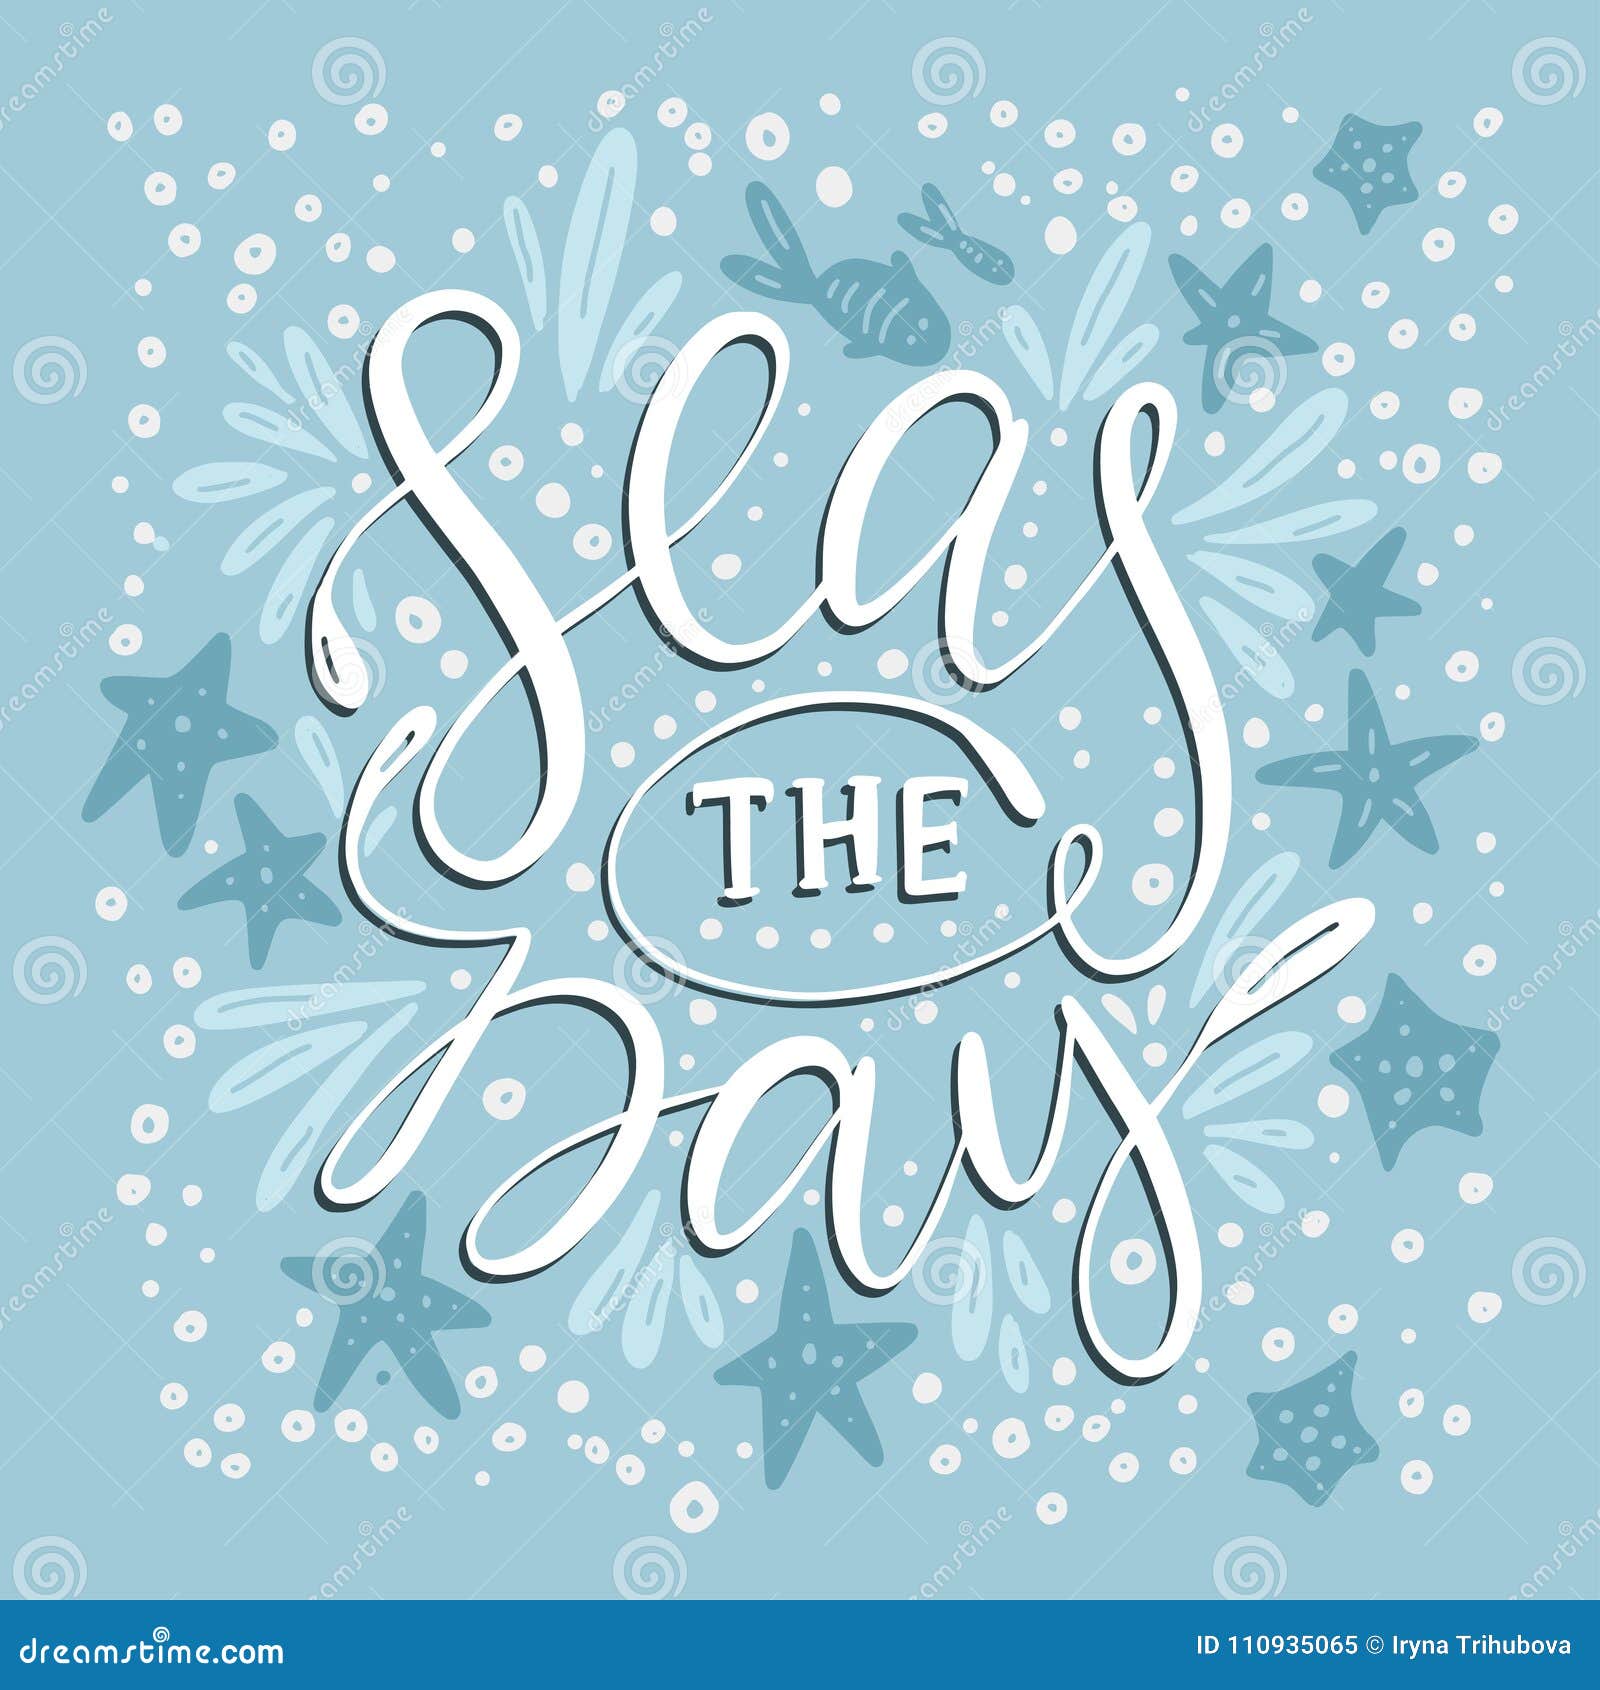 seas the day.  card.